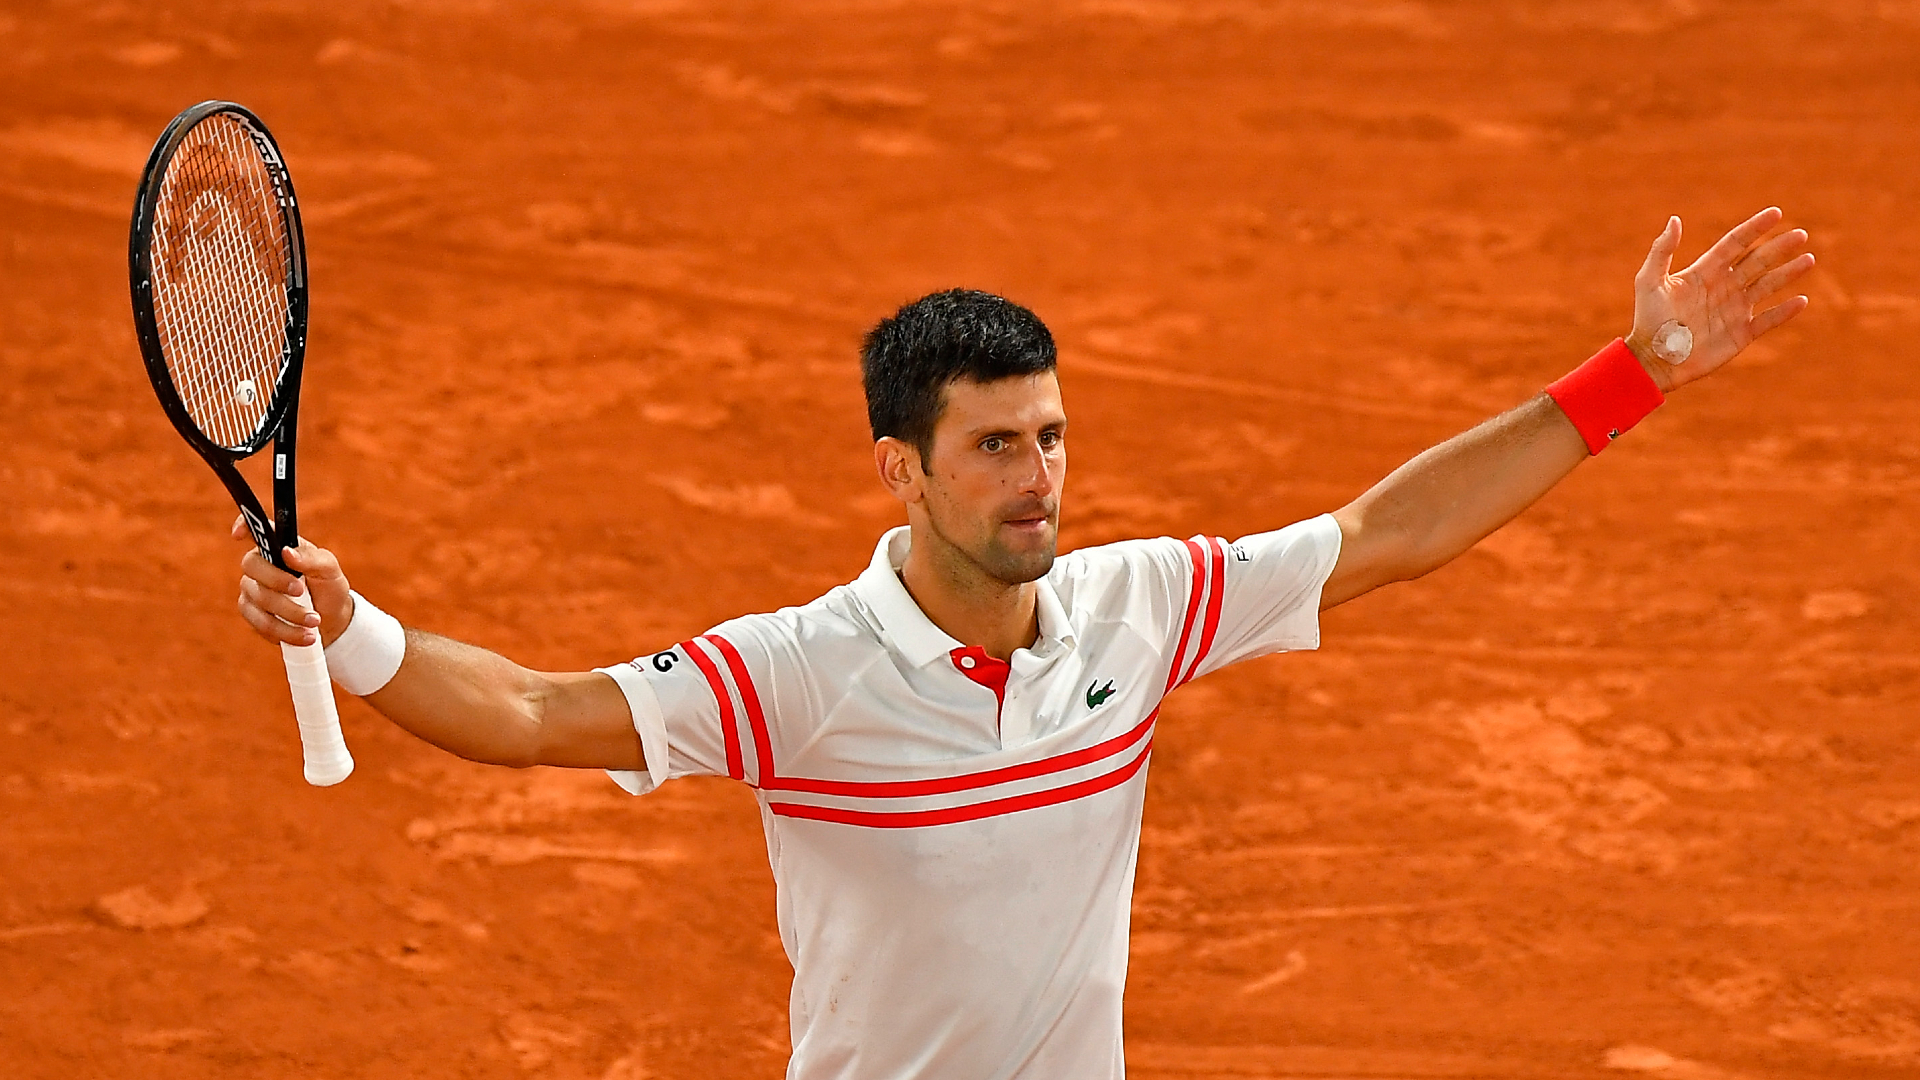 Novak Djokovic played a mesmerising match to reach the French Open final, but it remains to be seen how much that has drained his energy.